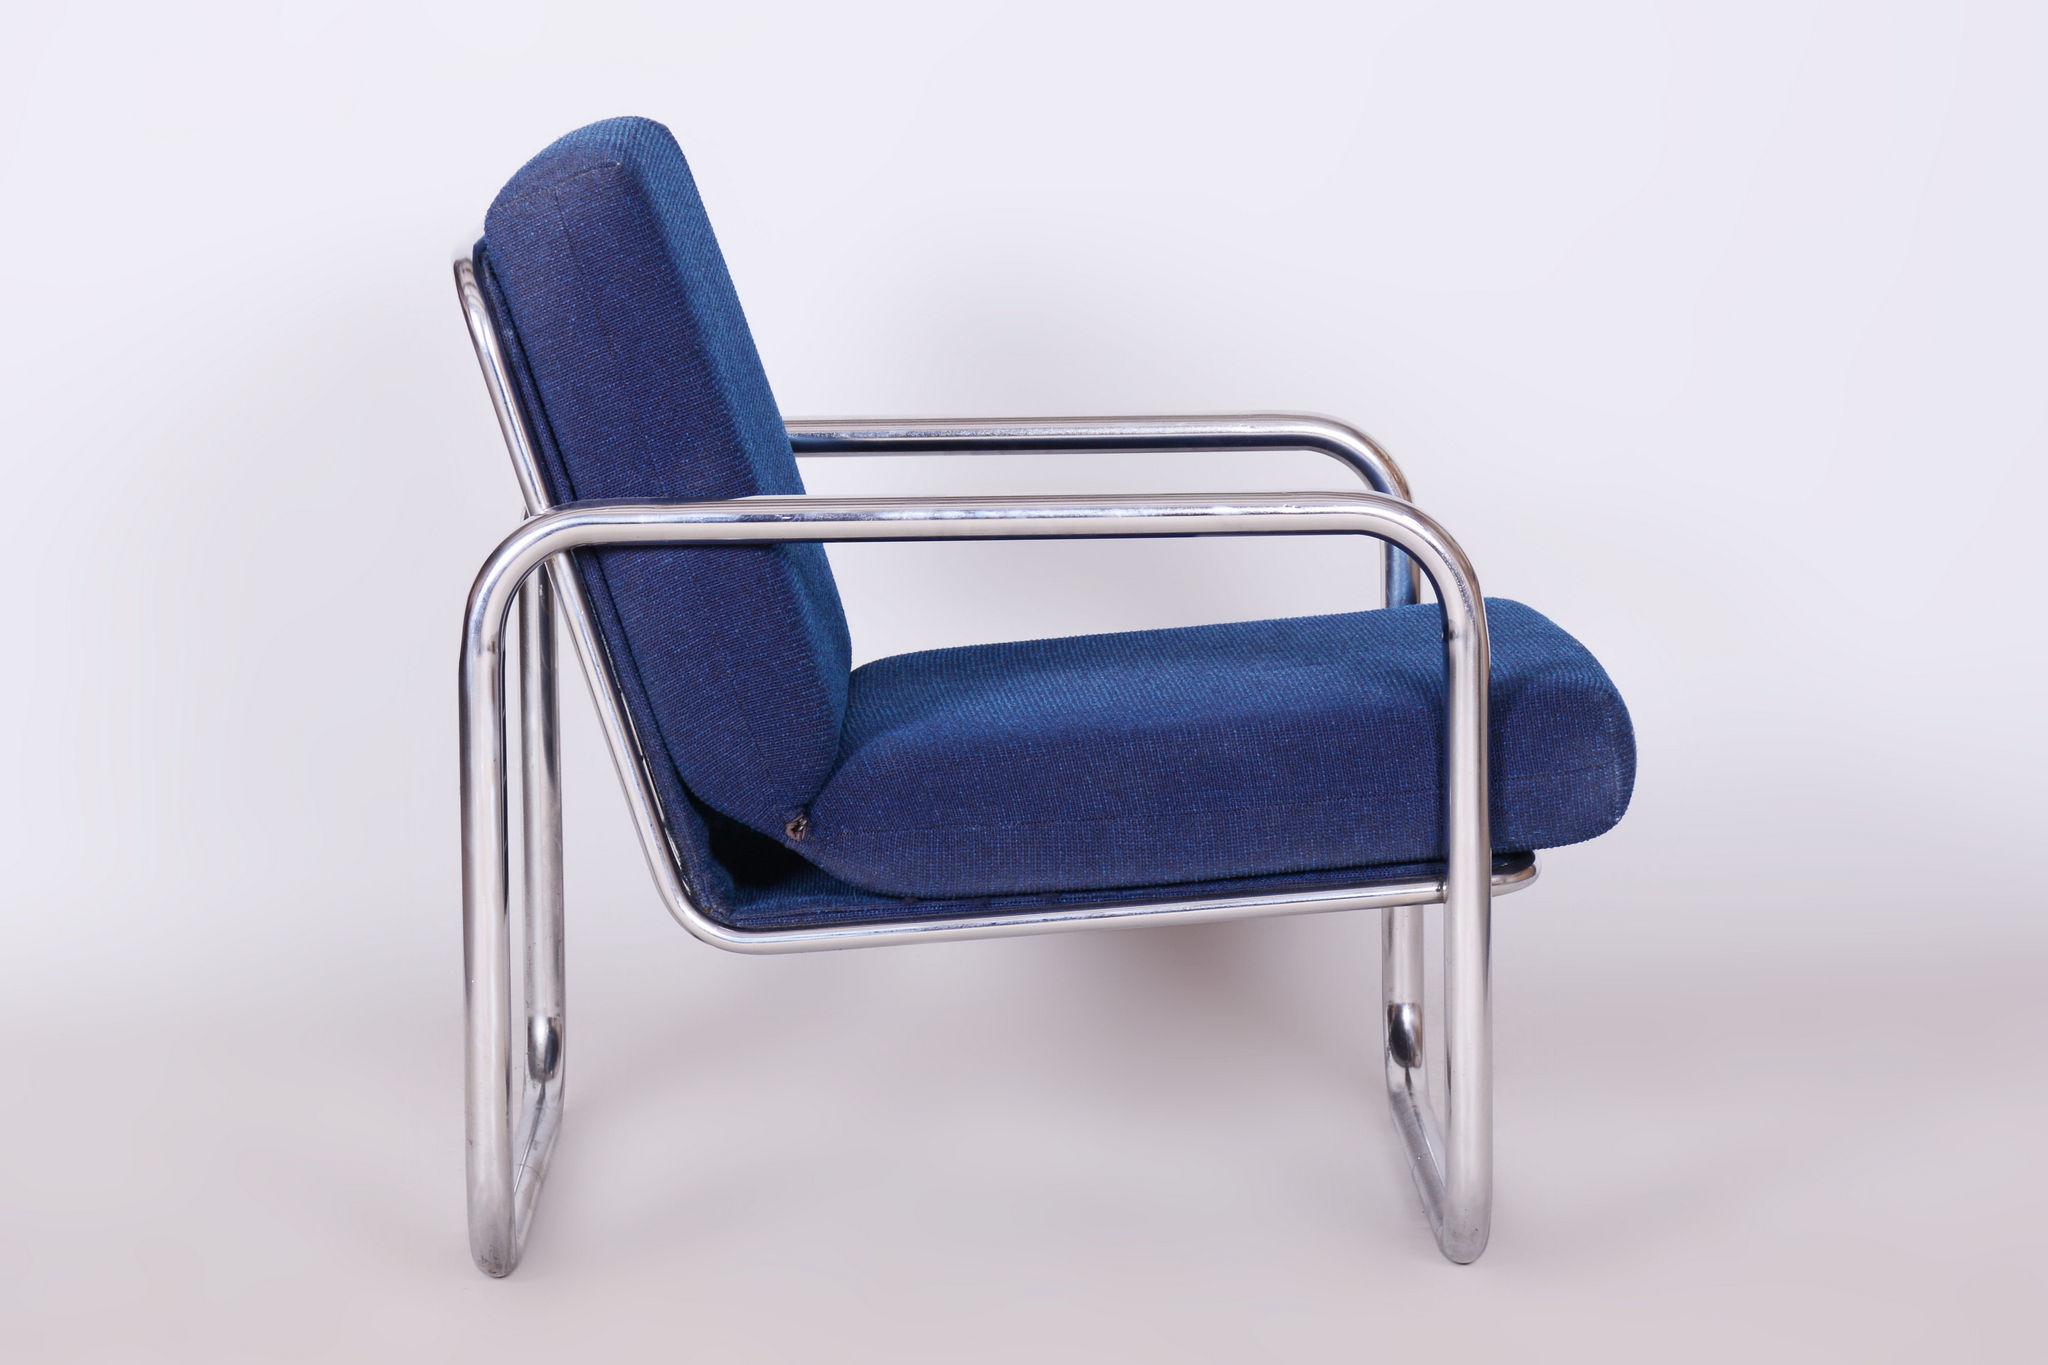 Original Bauhaus Armchair, Chrome-Plated Steel, Cleaned Upholstery, Czech, 1950s For Sale 3